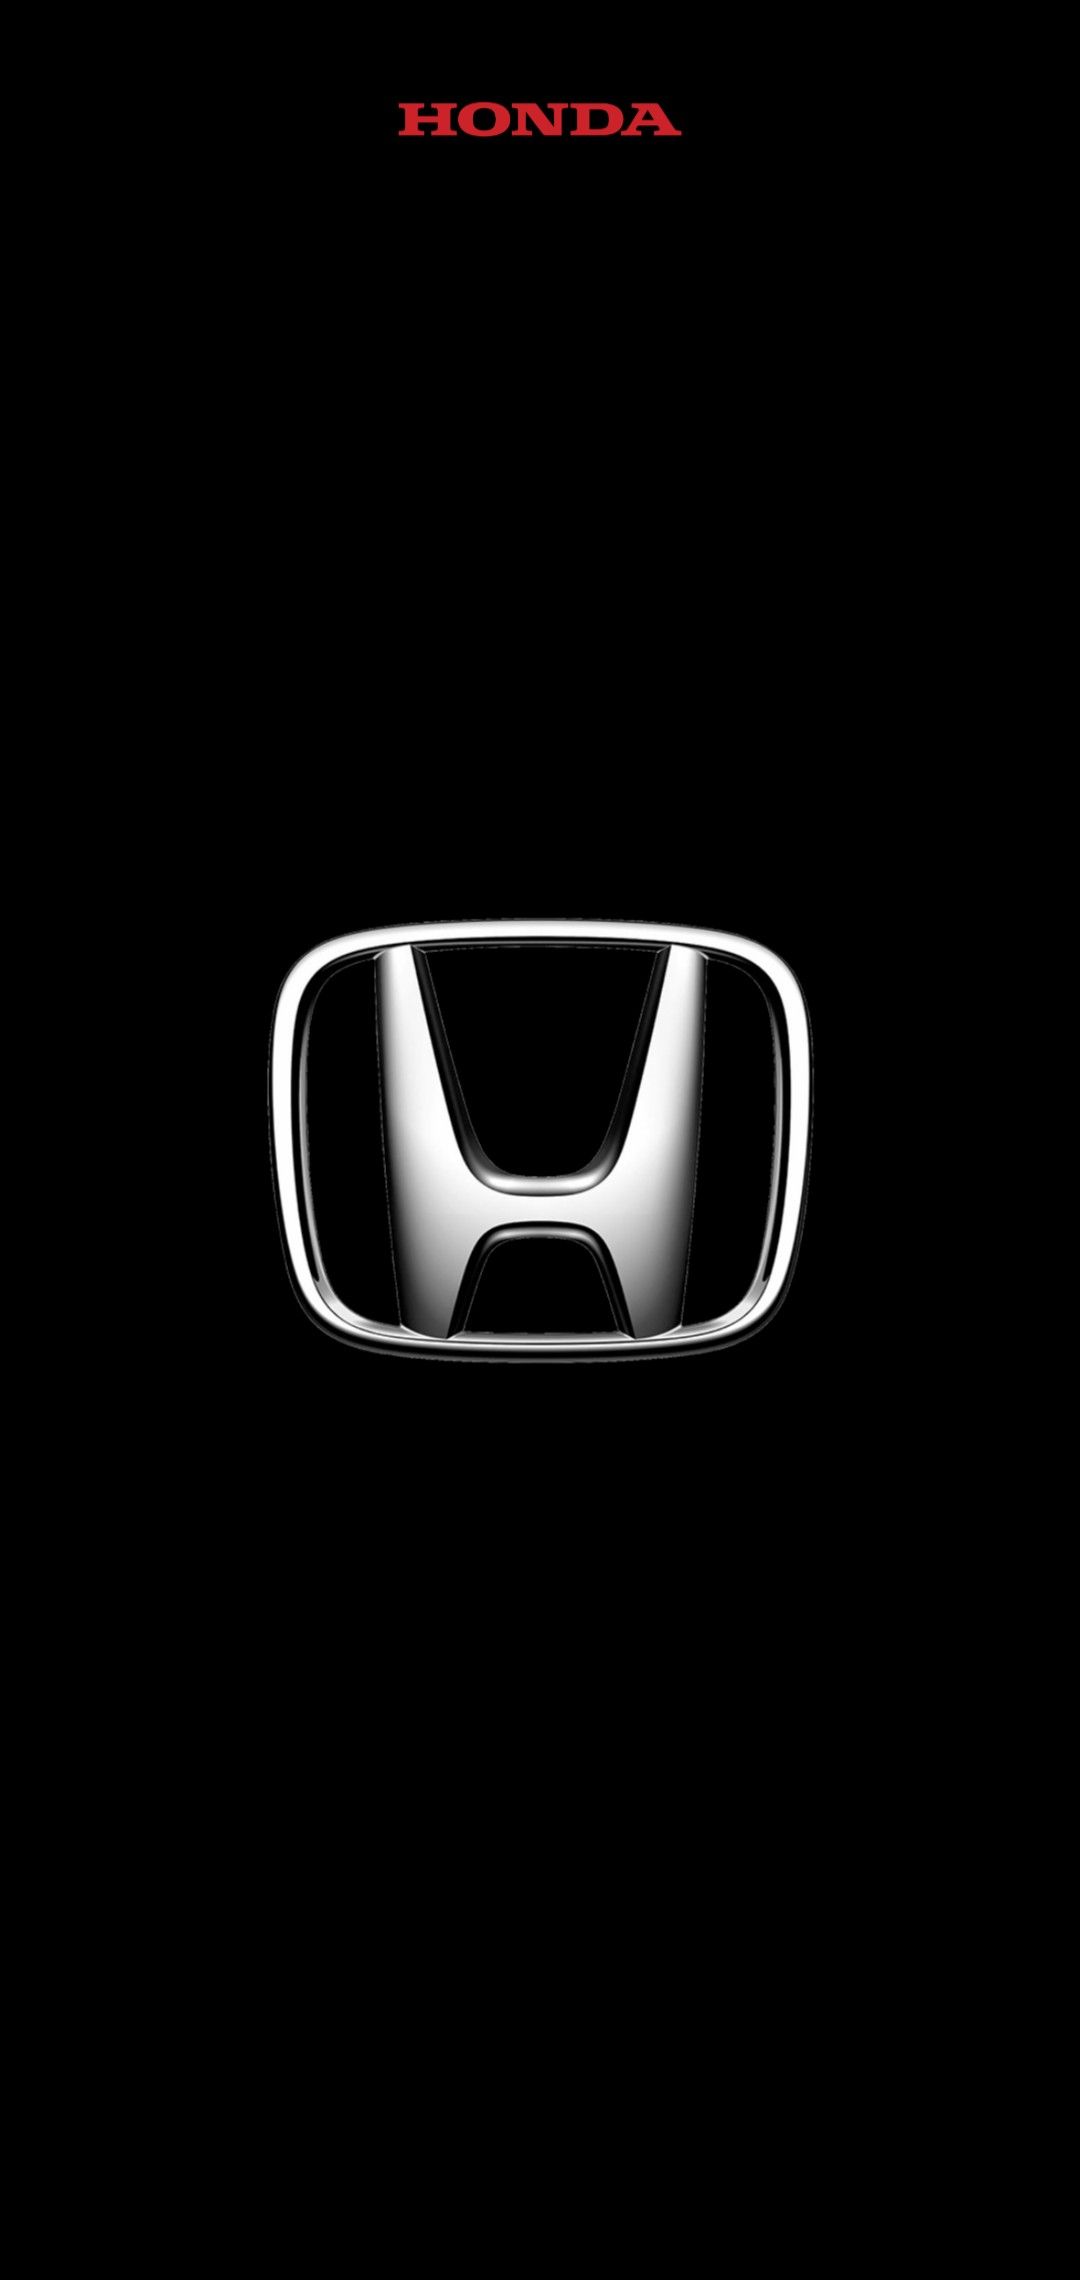 500 Honda Civic Pictures HD  Download Free Images on Unsplash